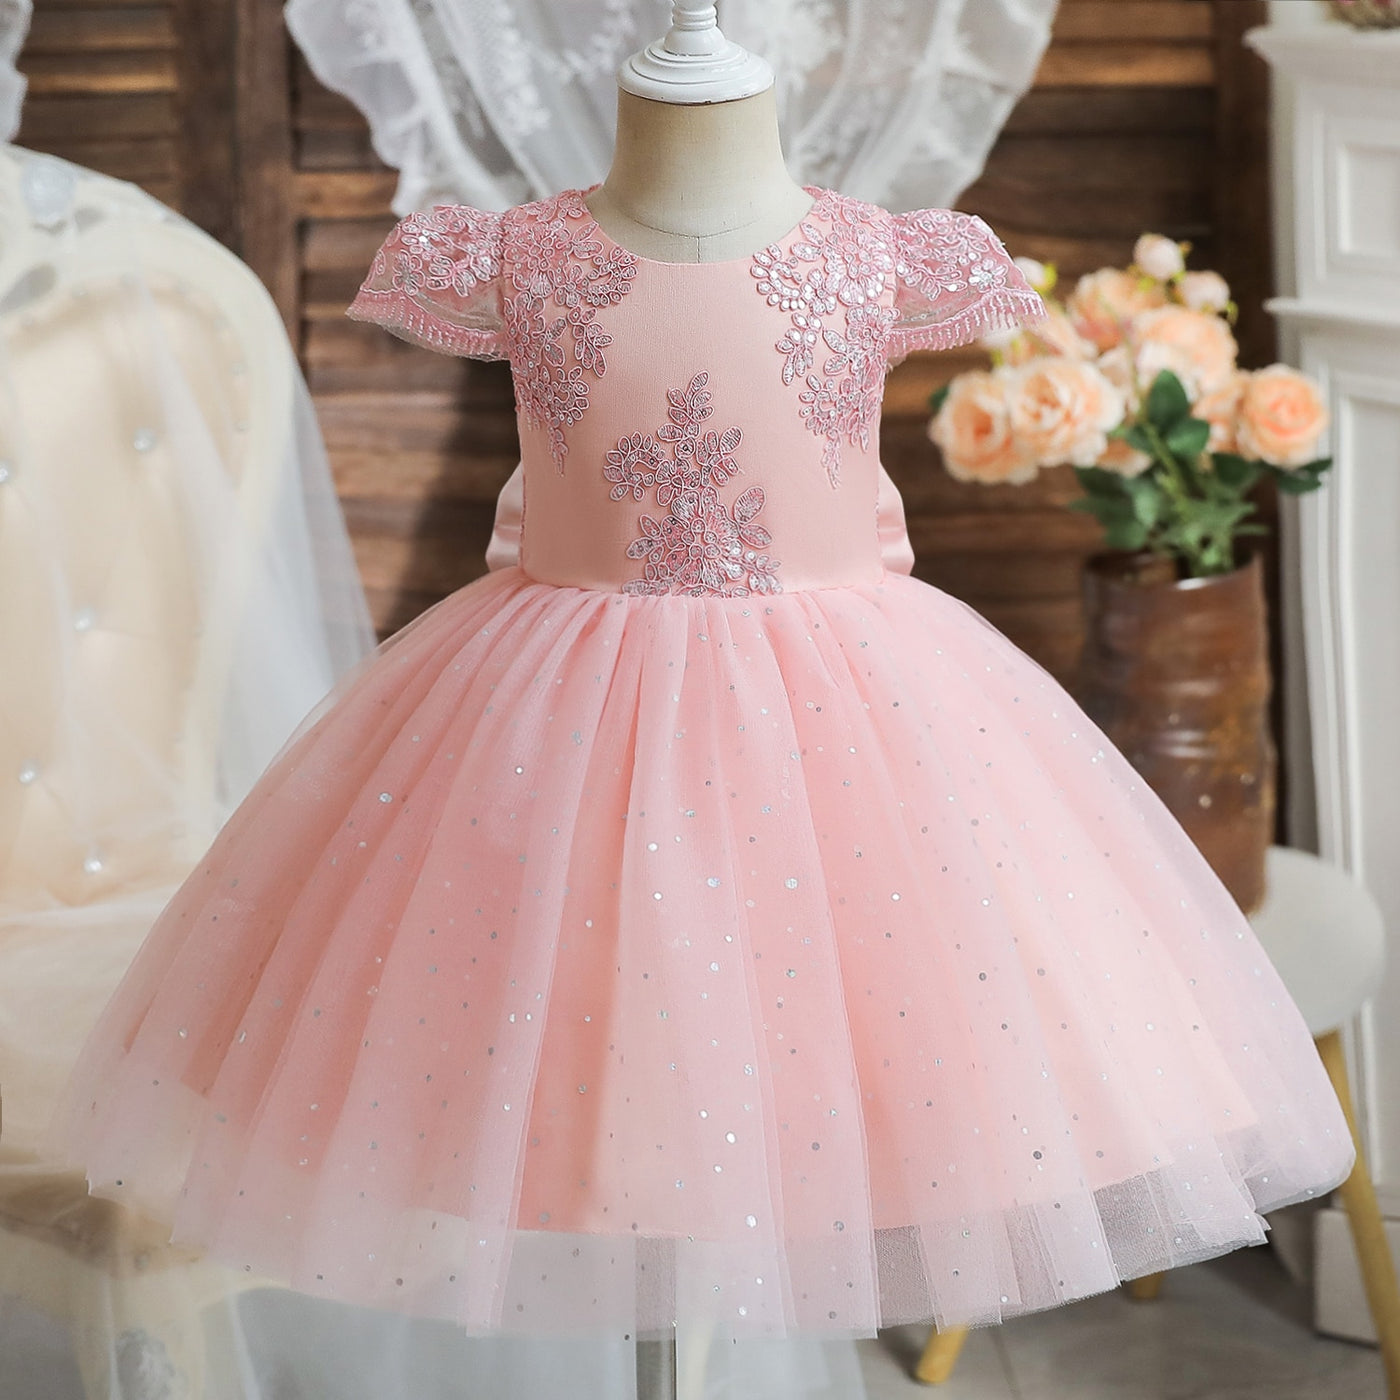 Shiny Lace Embroidery Dress 9M-5yrs Baby Toddler Girl Dress - Coco Potato - dresses and partywear for little girls